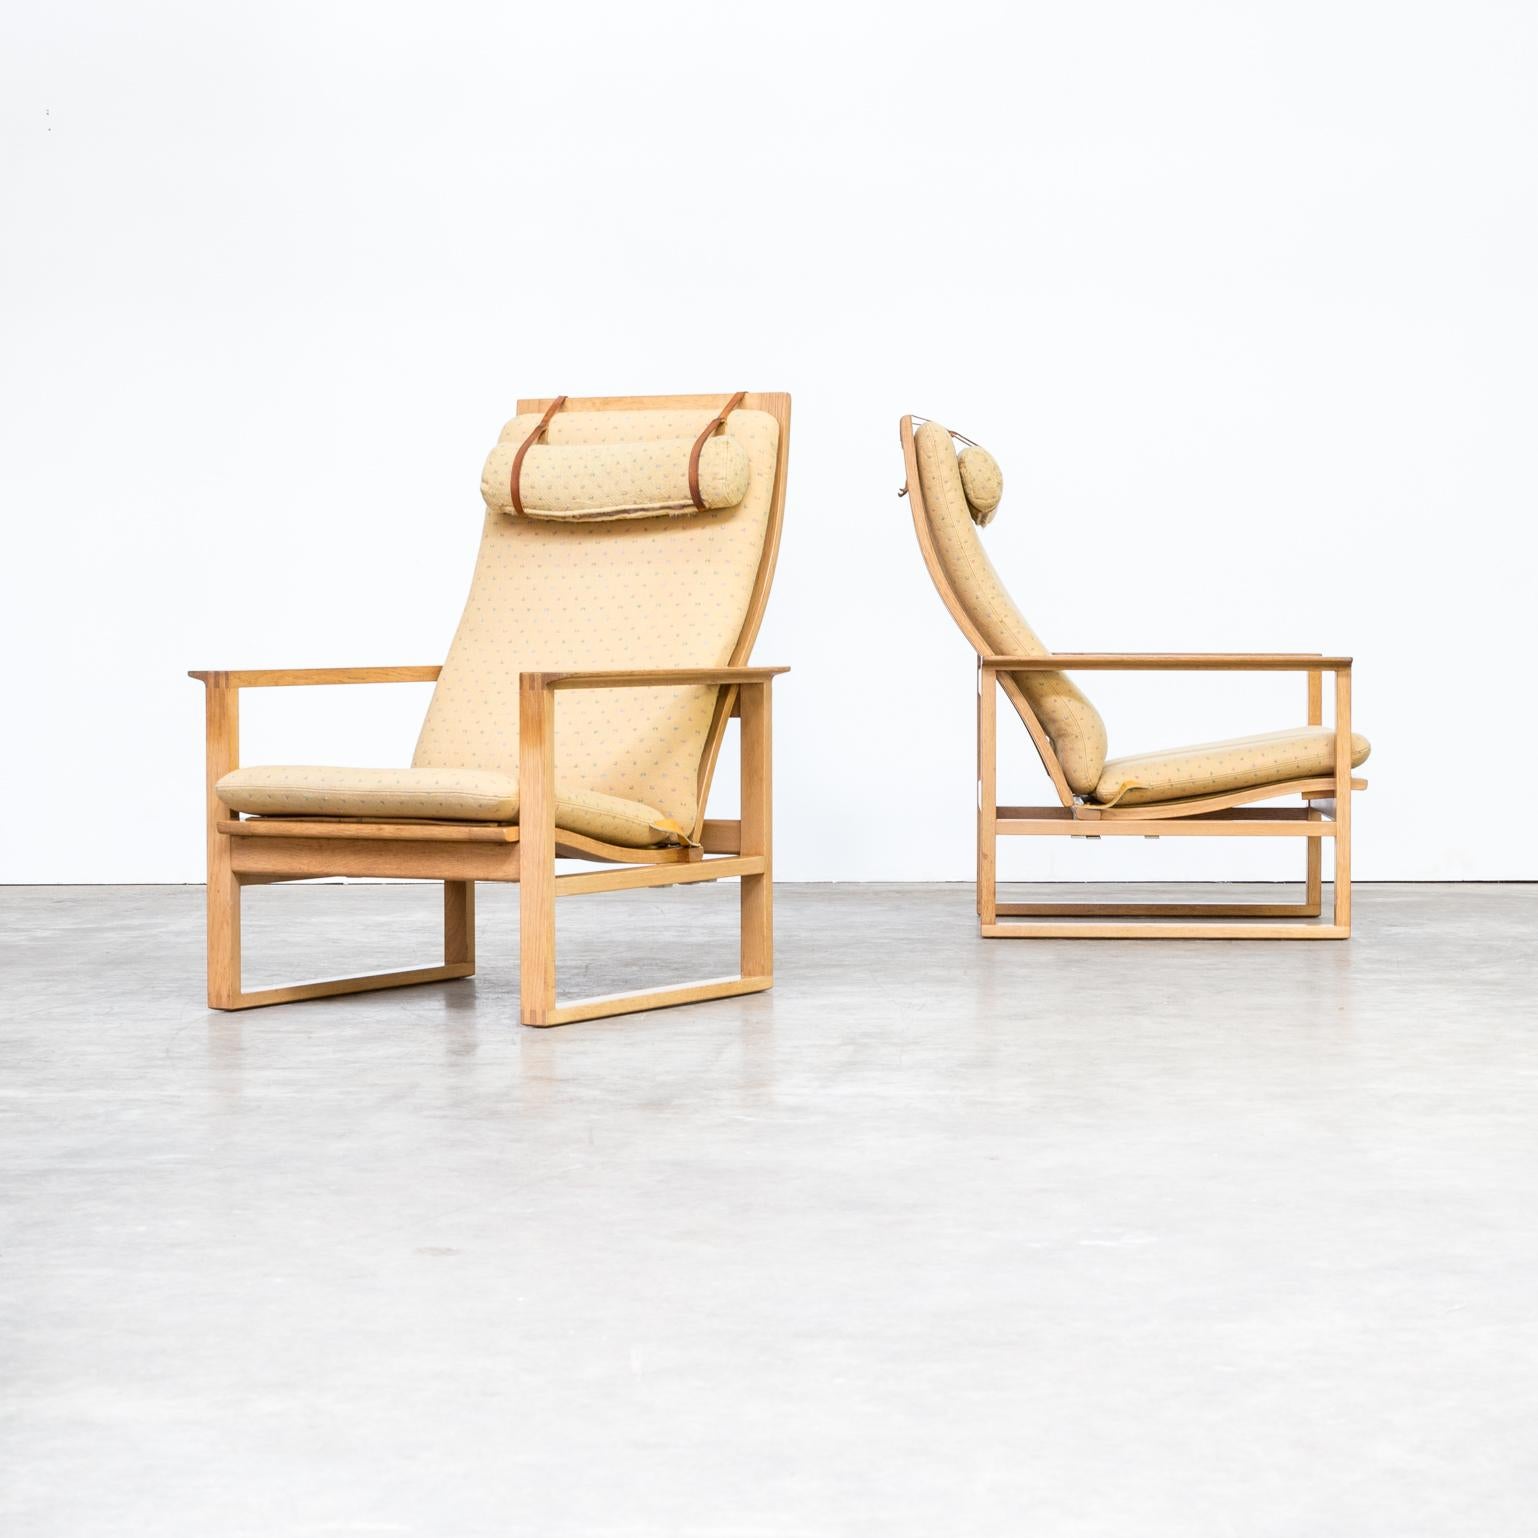 1970s Borge Mogensen fauteuil for Fredericia Stolefabrik set of 2. One set of two identical lounge chairs. Both good condition consistent with age and use.